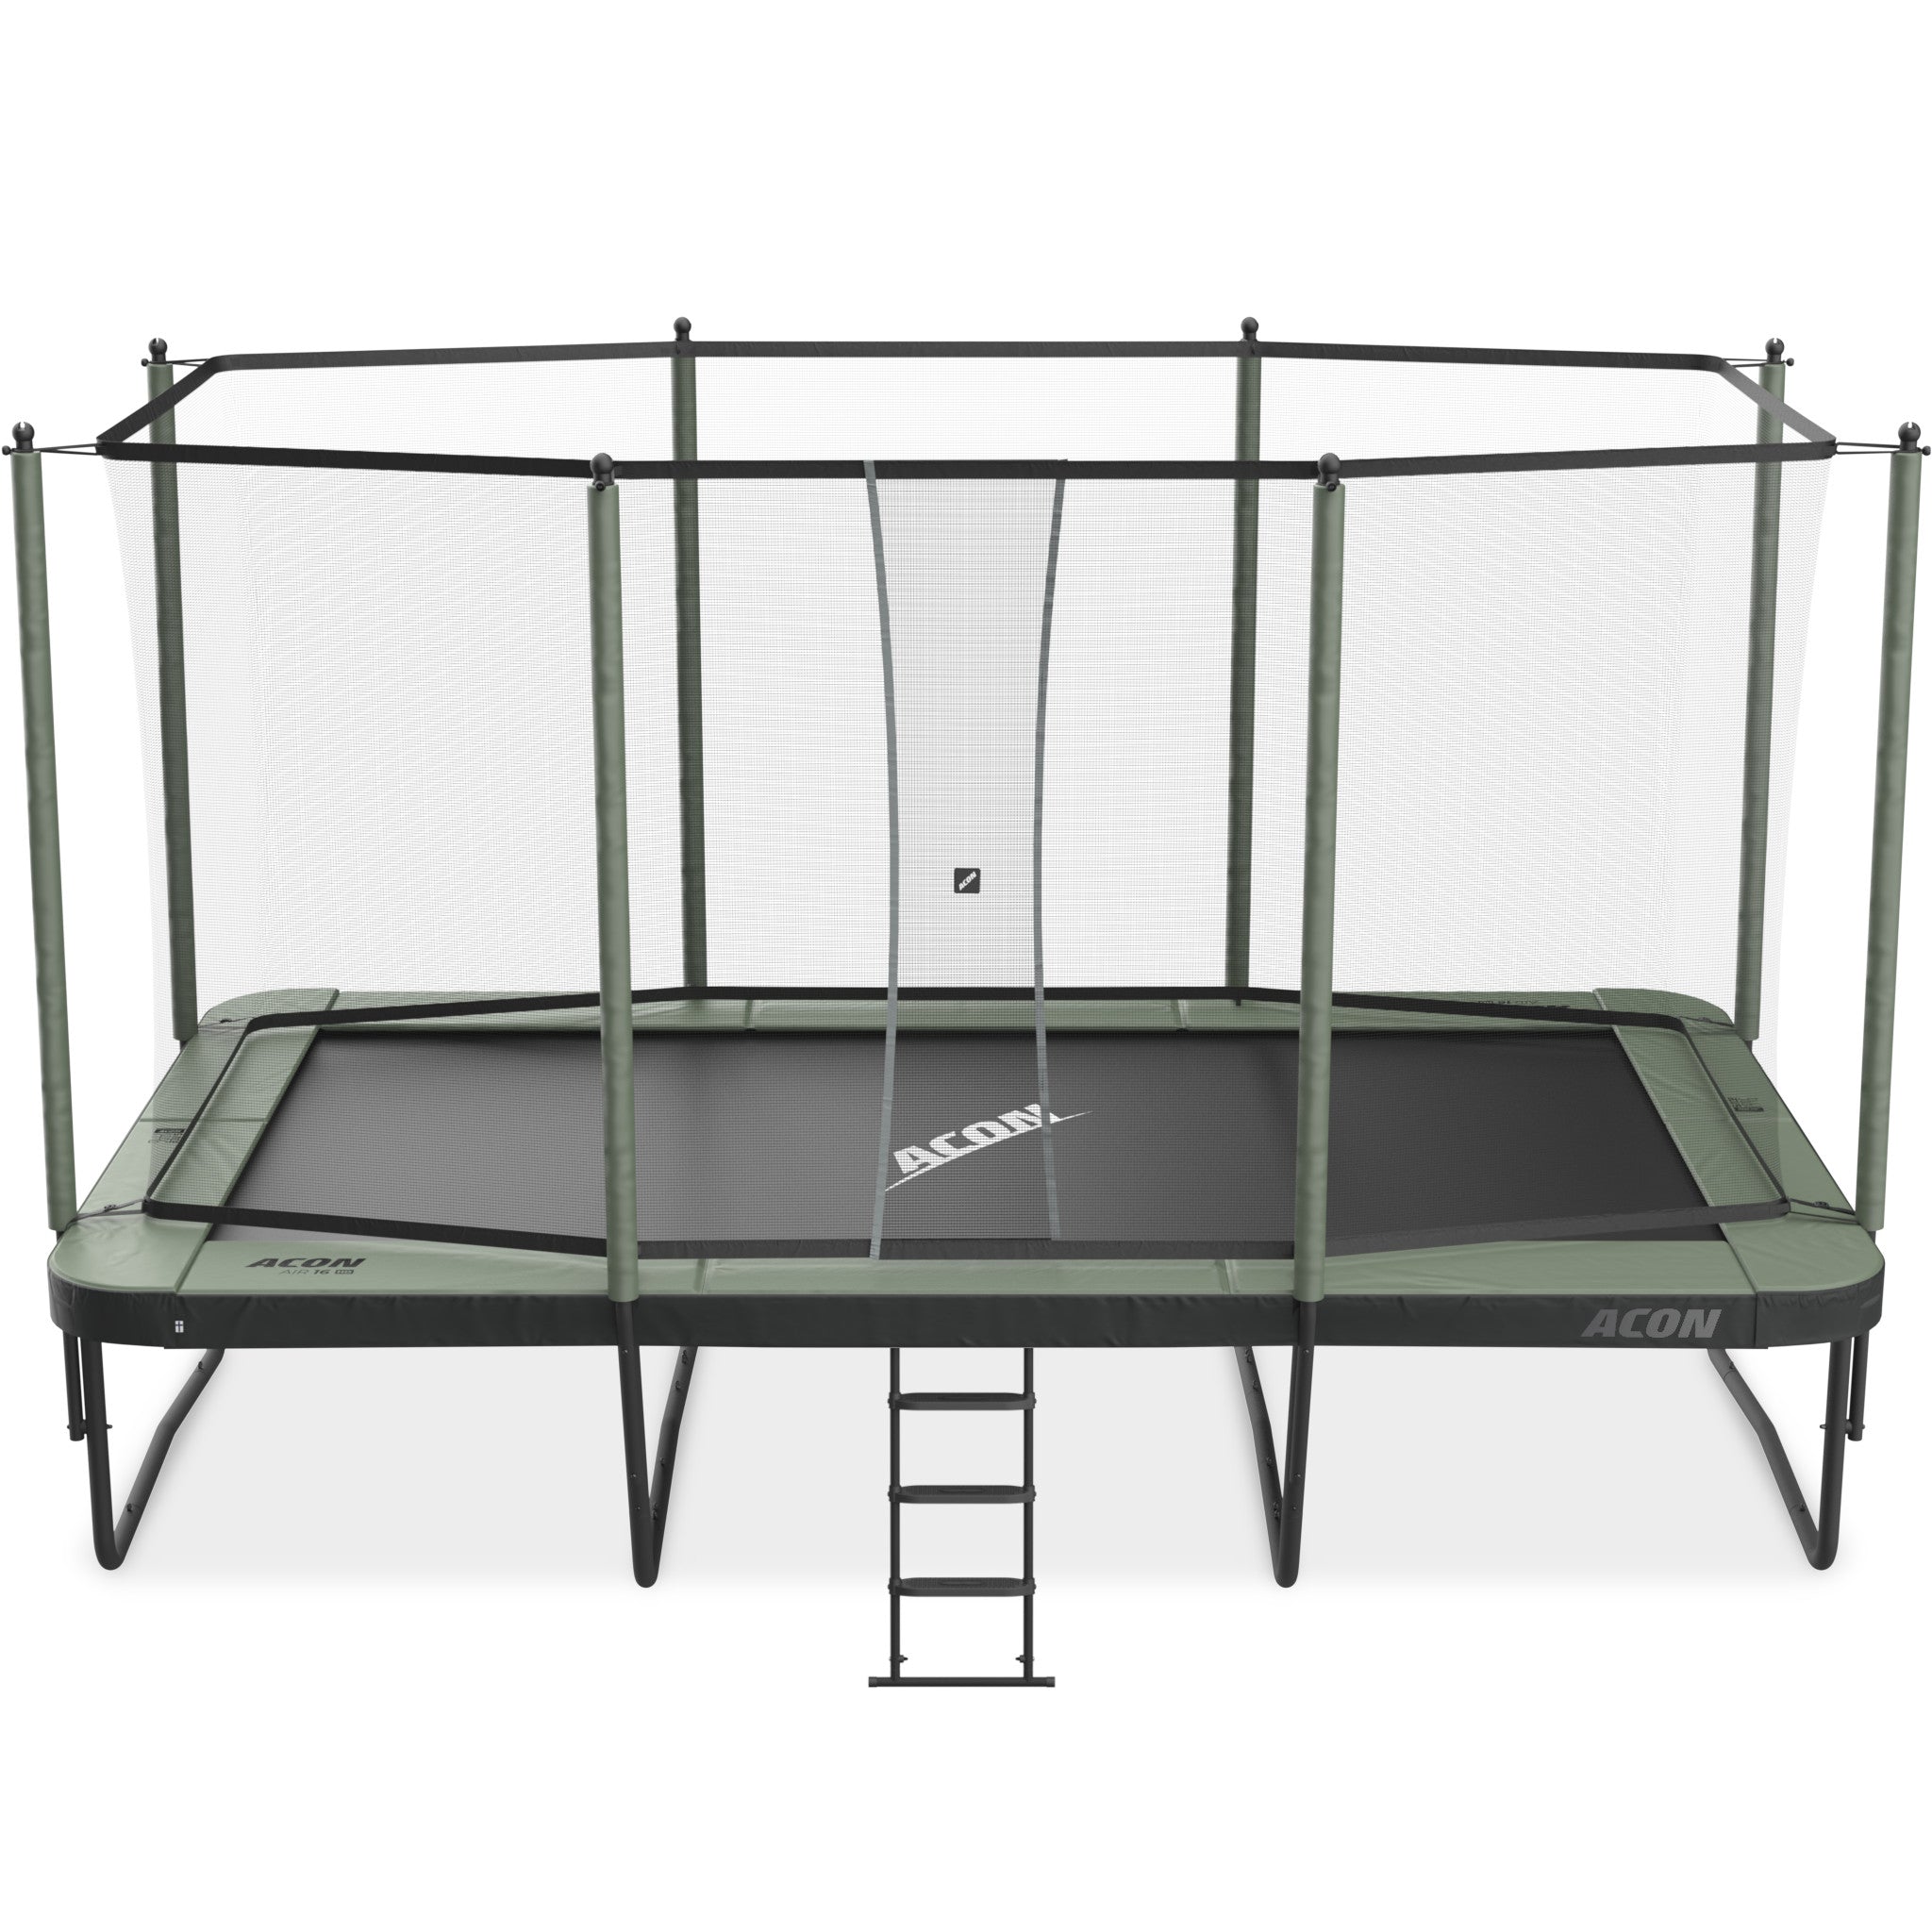 ACON  Air 16 Sport HD Trampoline with enclosure and ladder.